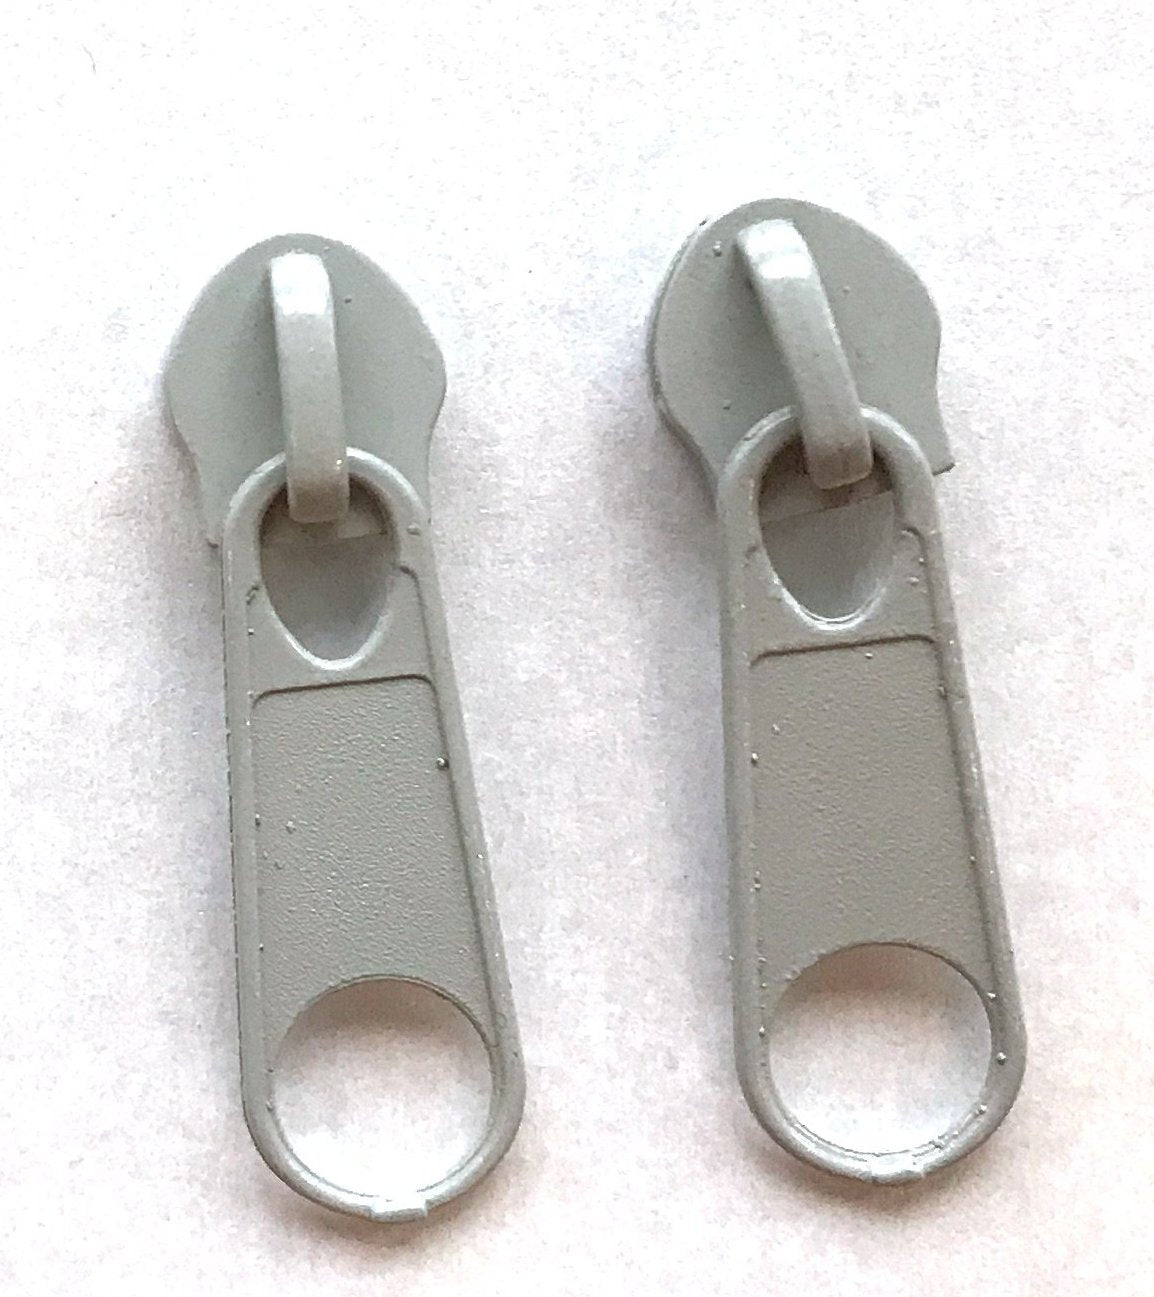 Light grey continuous long chain zipper tape and sliders